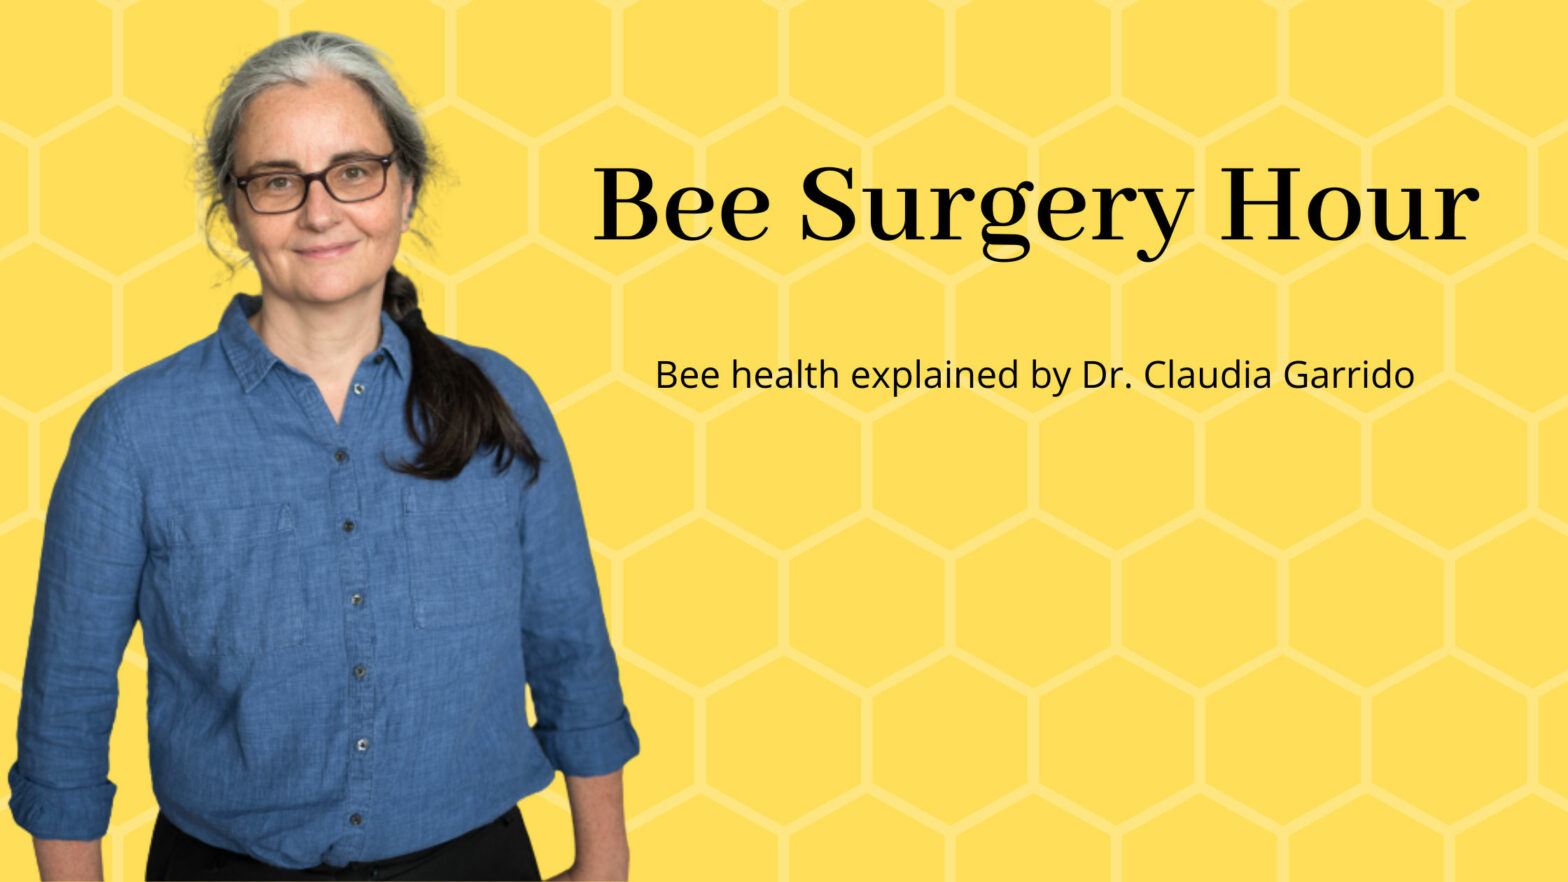 bee health knowledge, varroa treatments, good practices, glory in prevention, honey bee health, oxalic acid treatments, Bee Surgery Hours